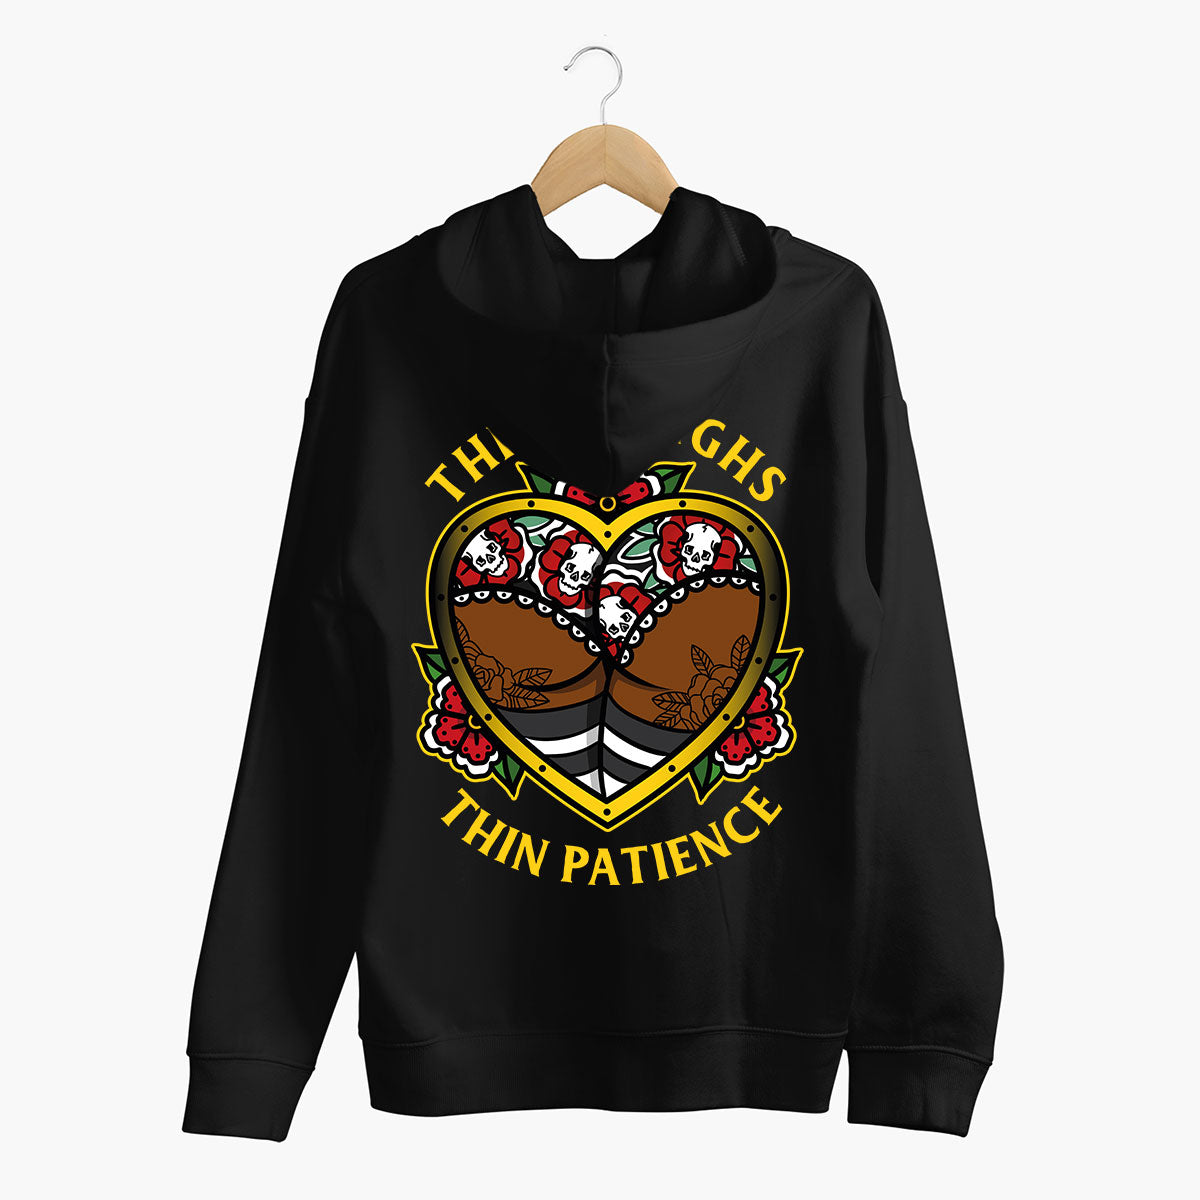 Thick Thighs Thin Patience Hoodie (Unisex)